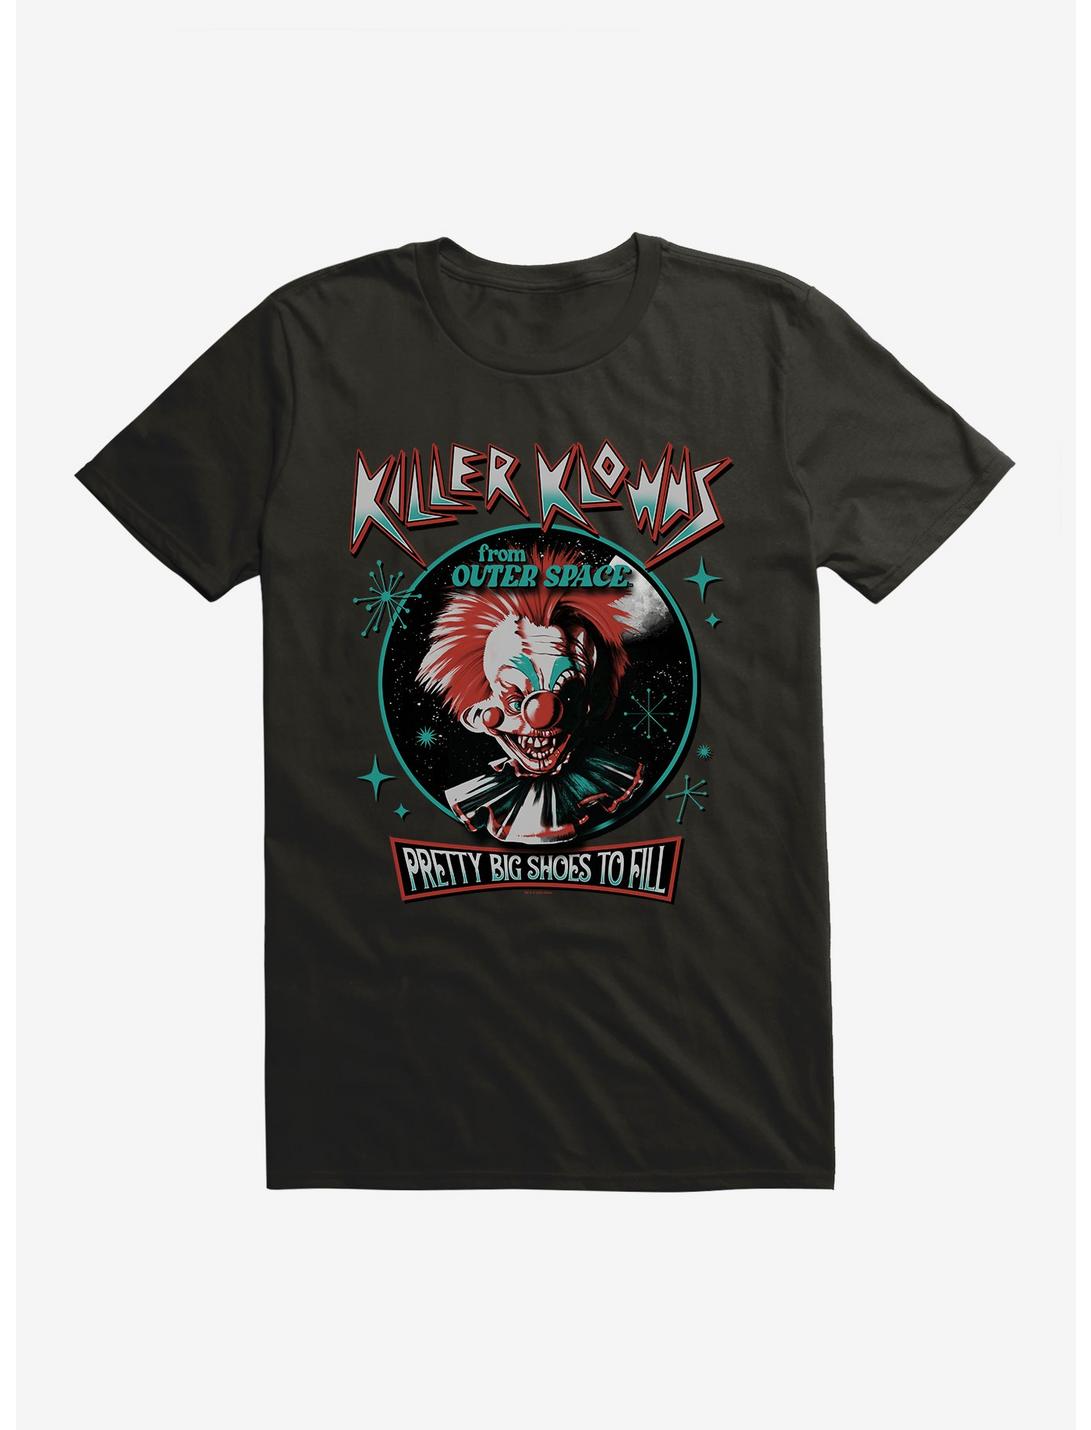 Killer Klowns From Outer Space Pretty Big Shoes To Fill T-Shirt, BLACK, hi-res